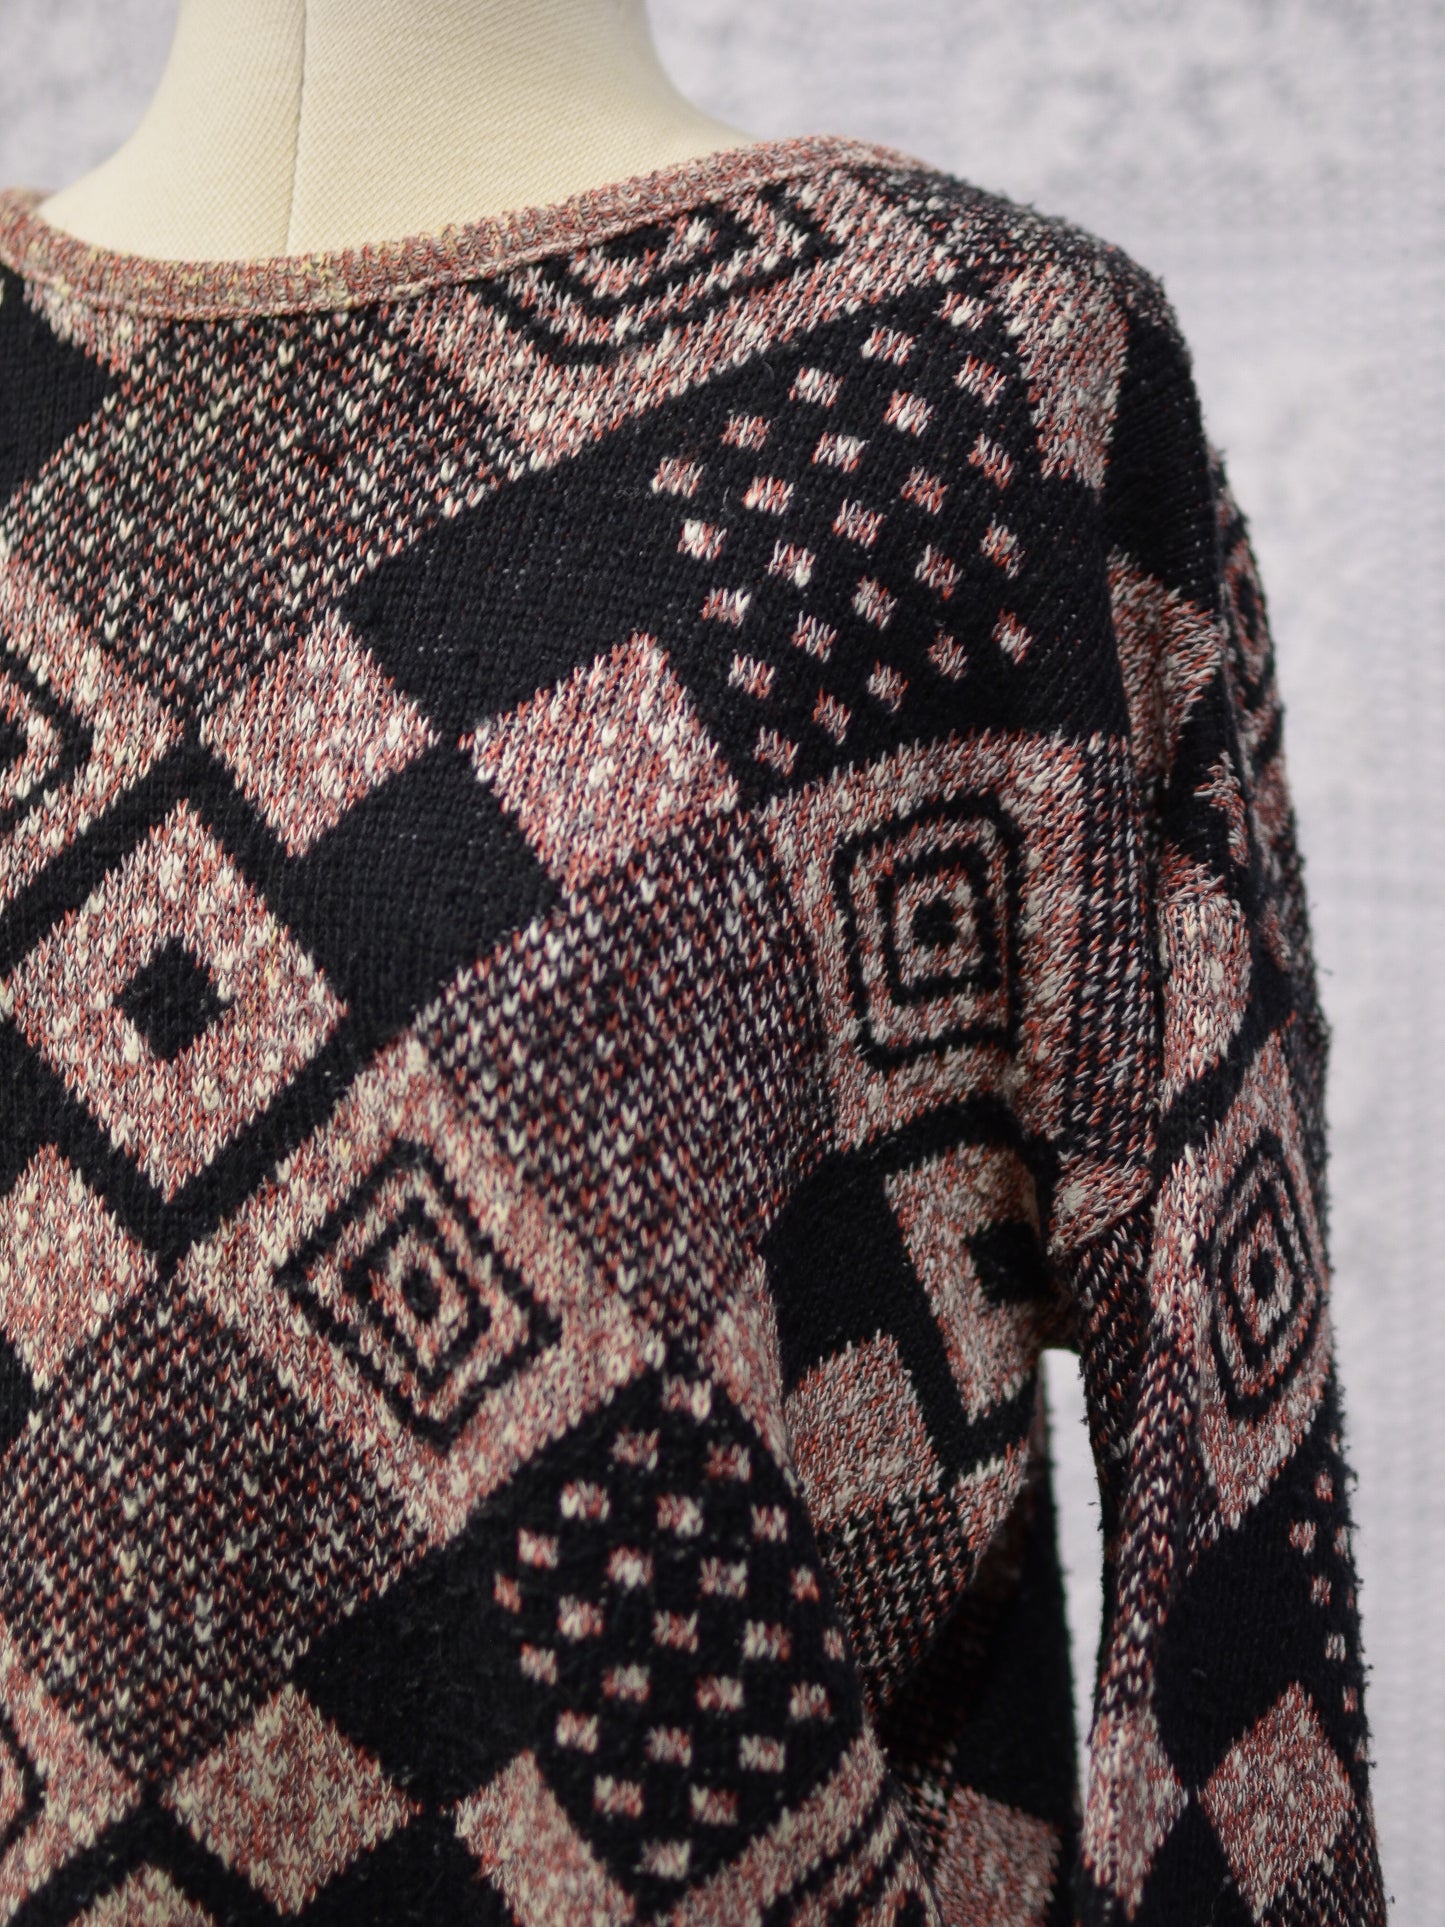 1980s BHS red and black geometric pattern boxy cropped jumper